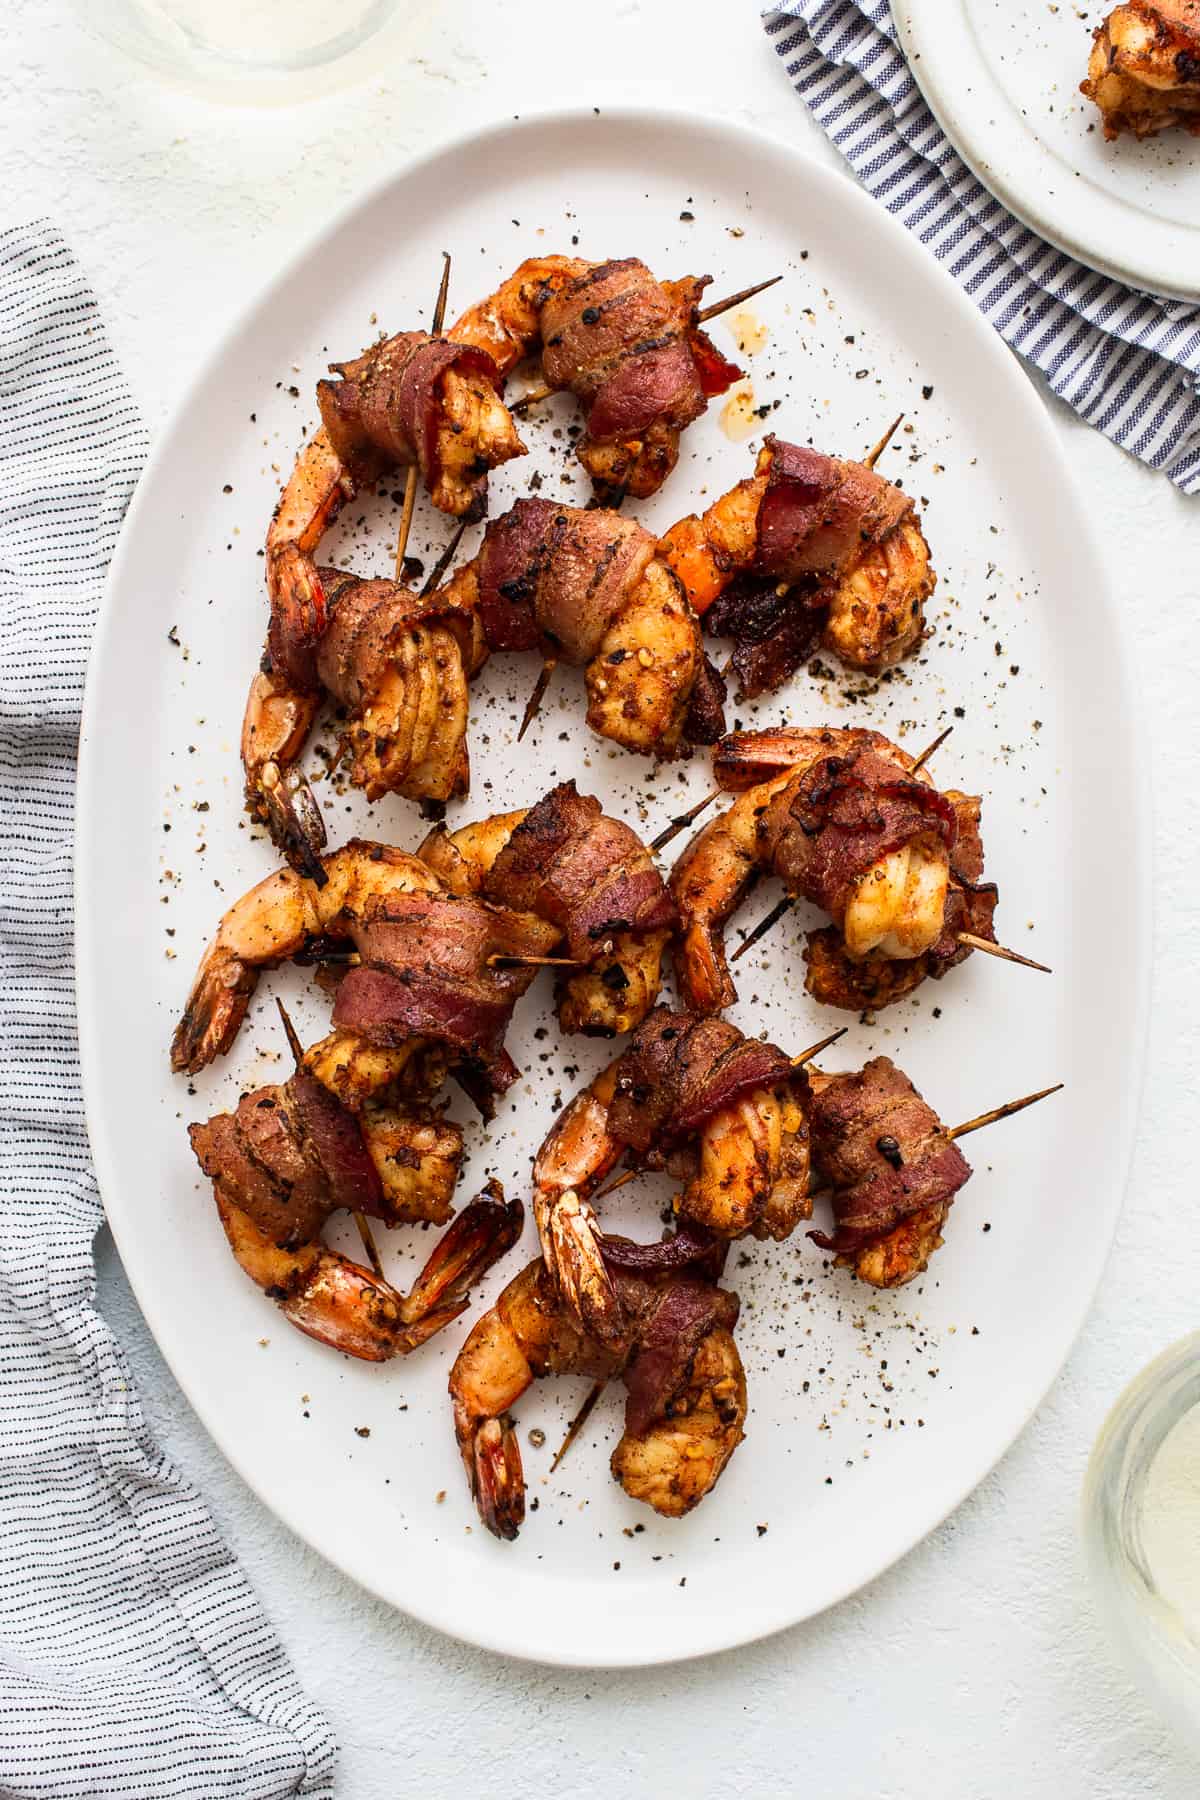 Bacon wrapped shrimp on a platter.